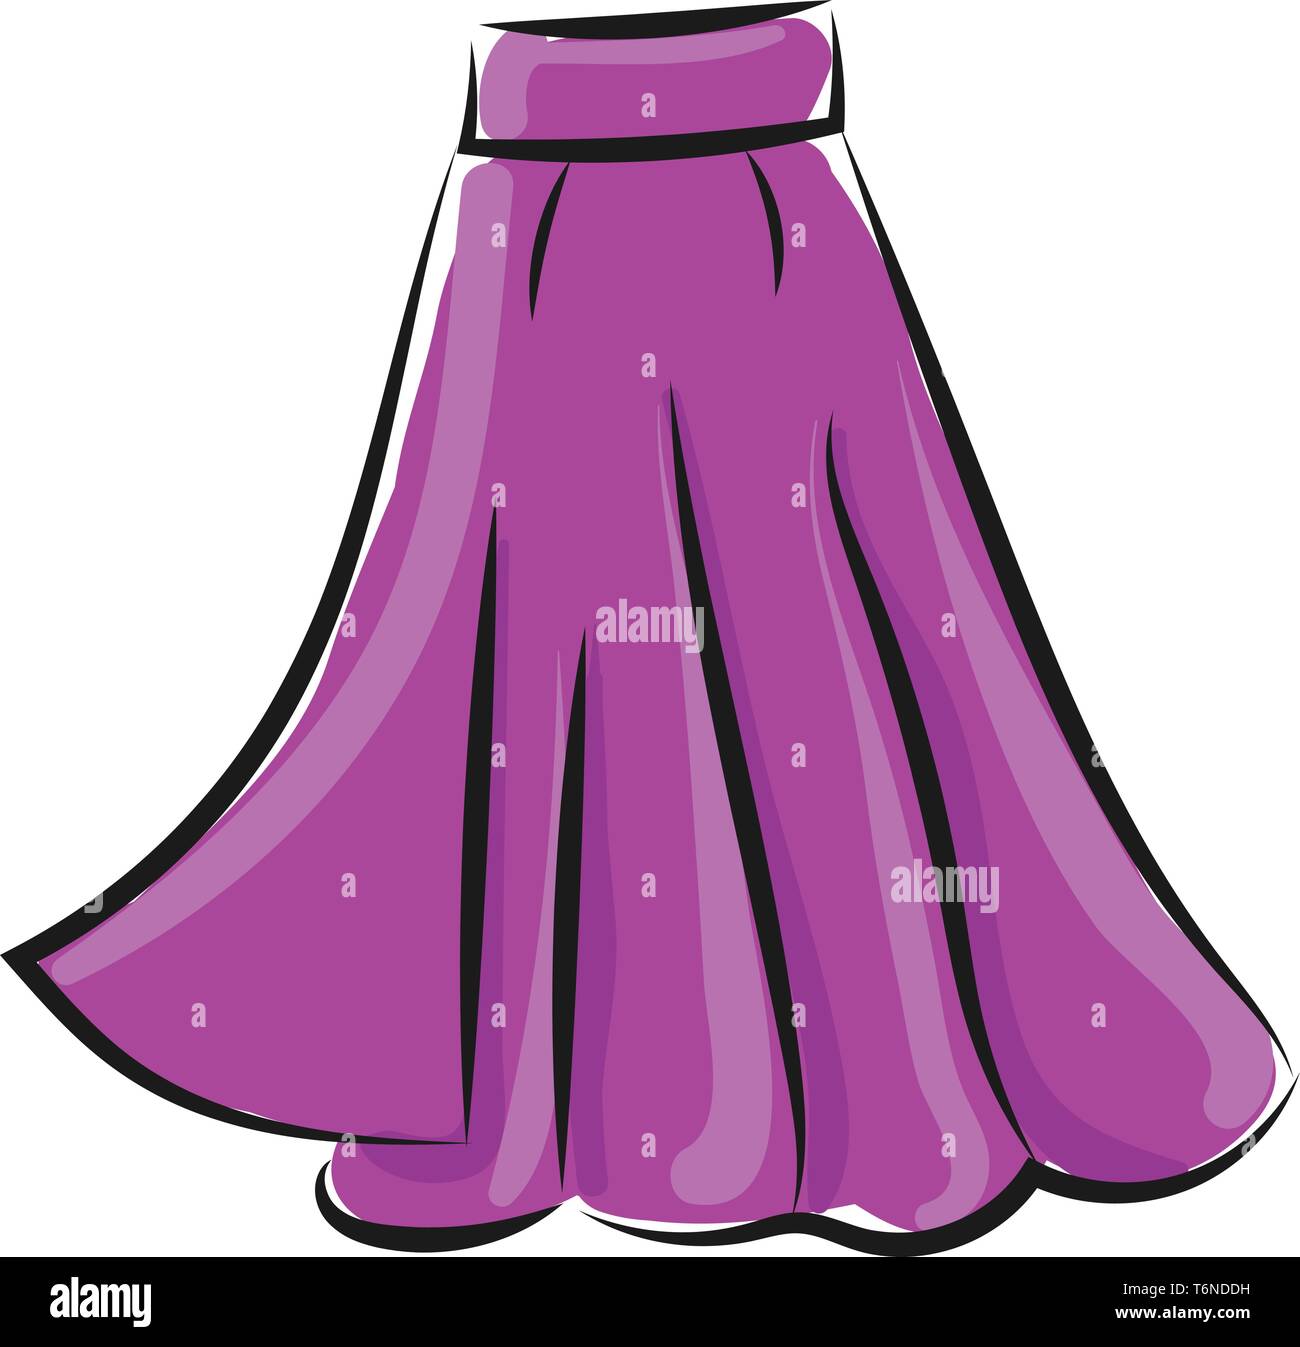 Form fitting skirt Stock Vector Images - Alamy